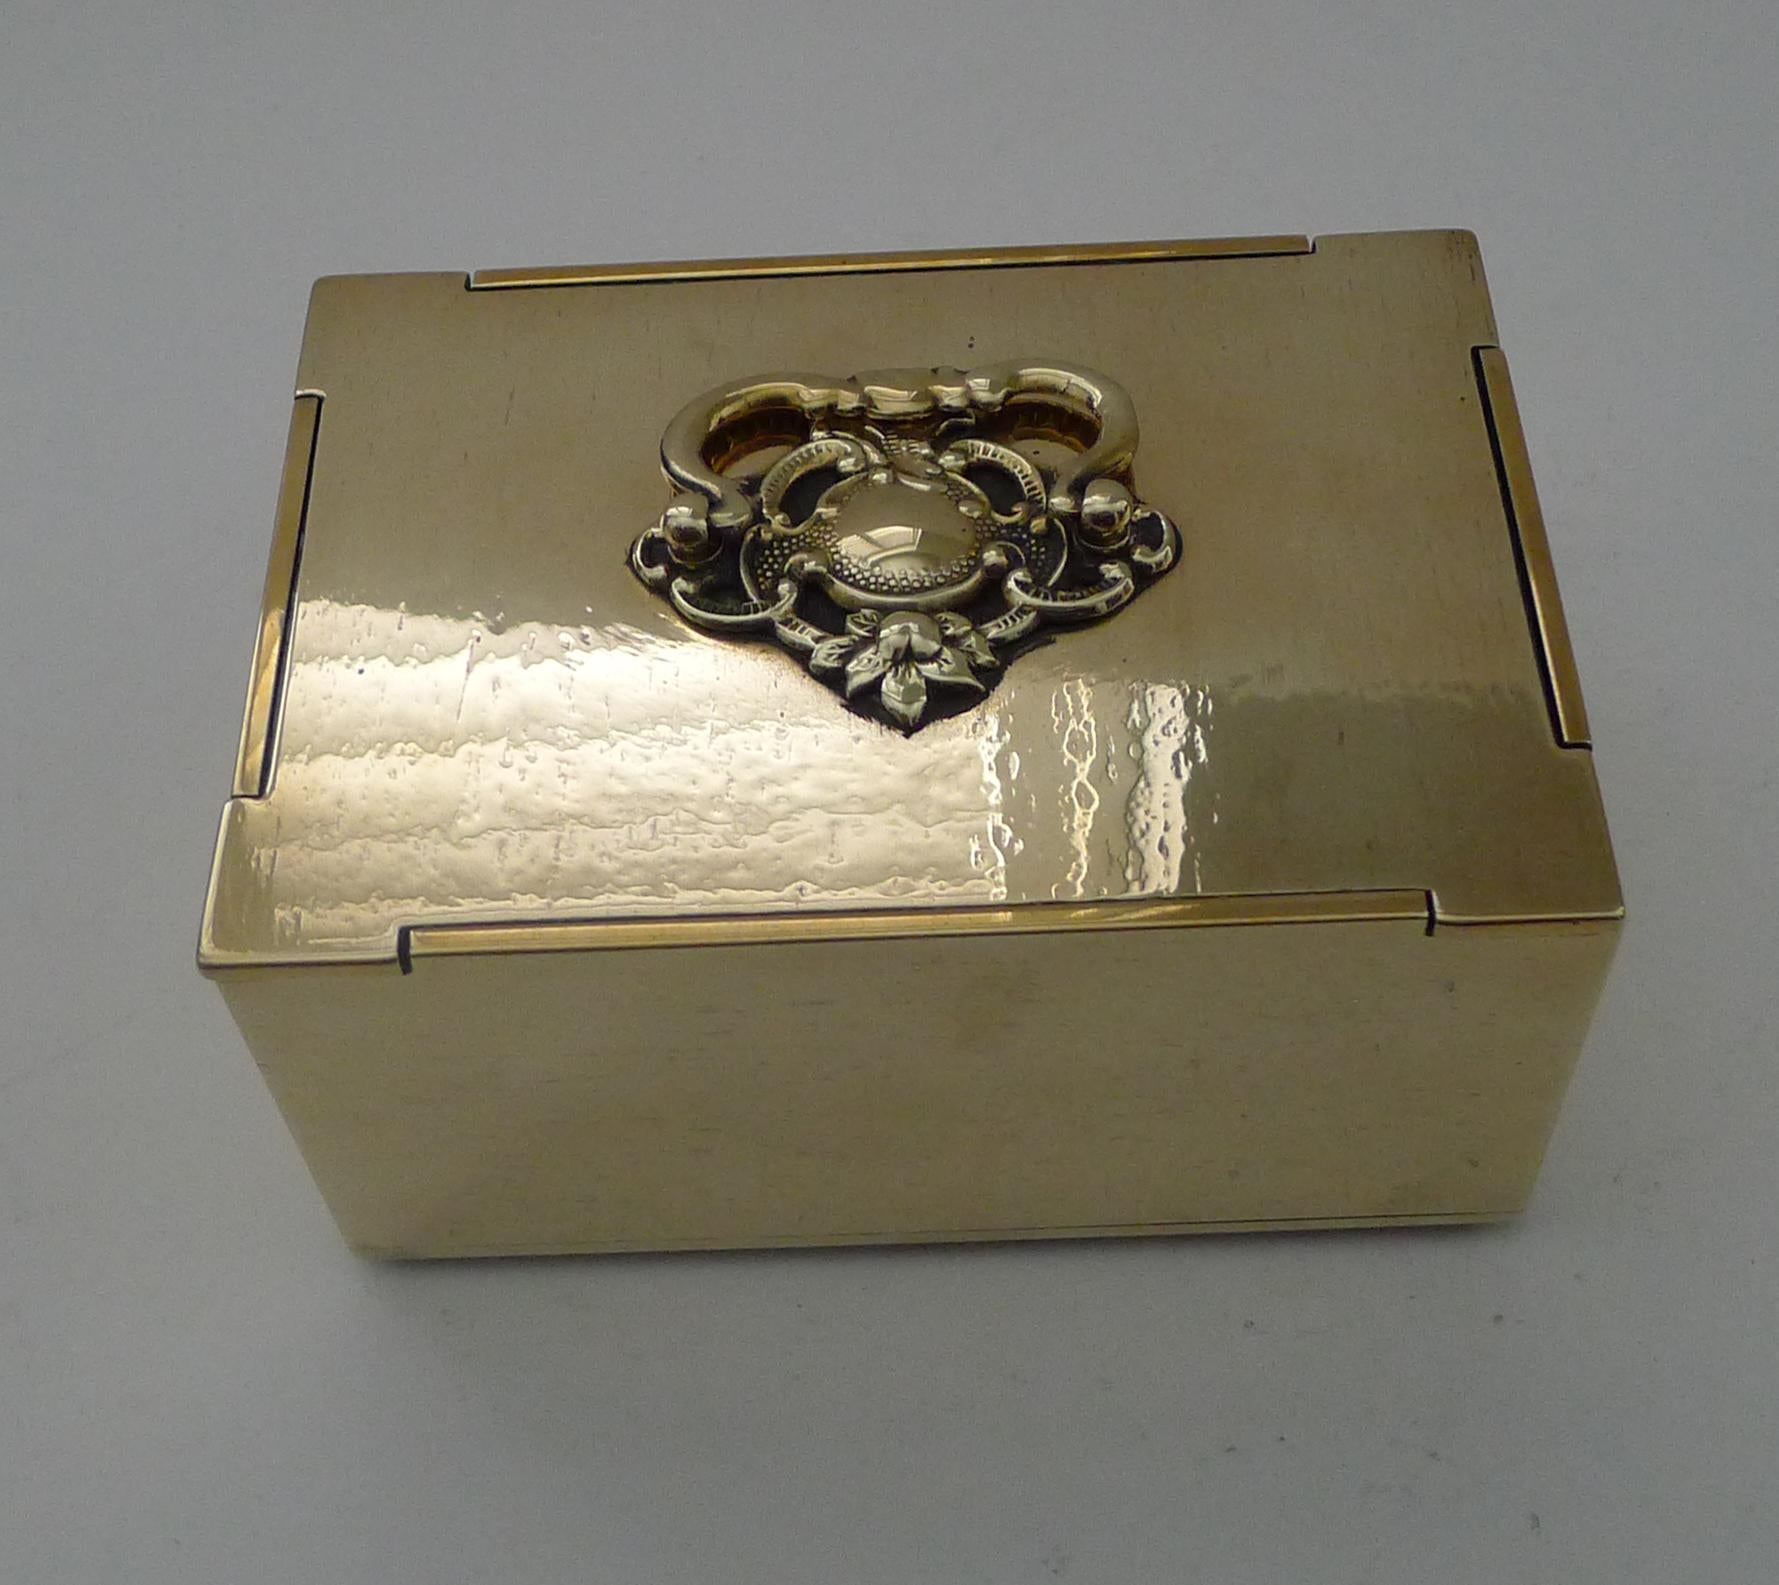 Antique French Cast Brass Jewellery Box / Casket, circa 1900 In Good Condition For Sale In Bath, GB